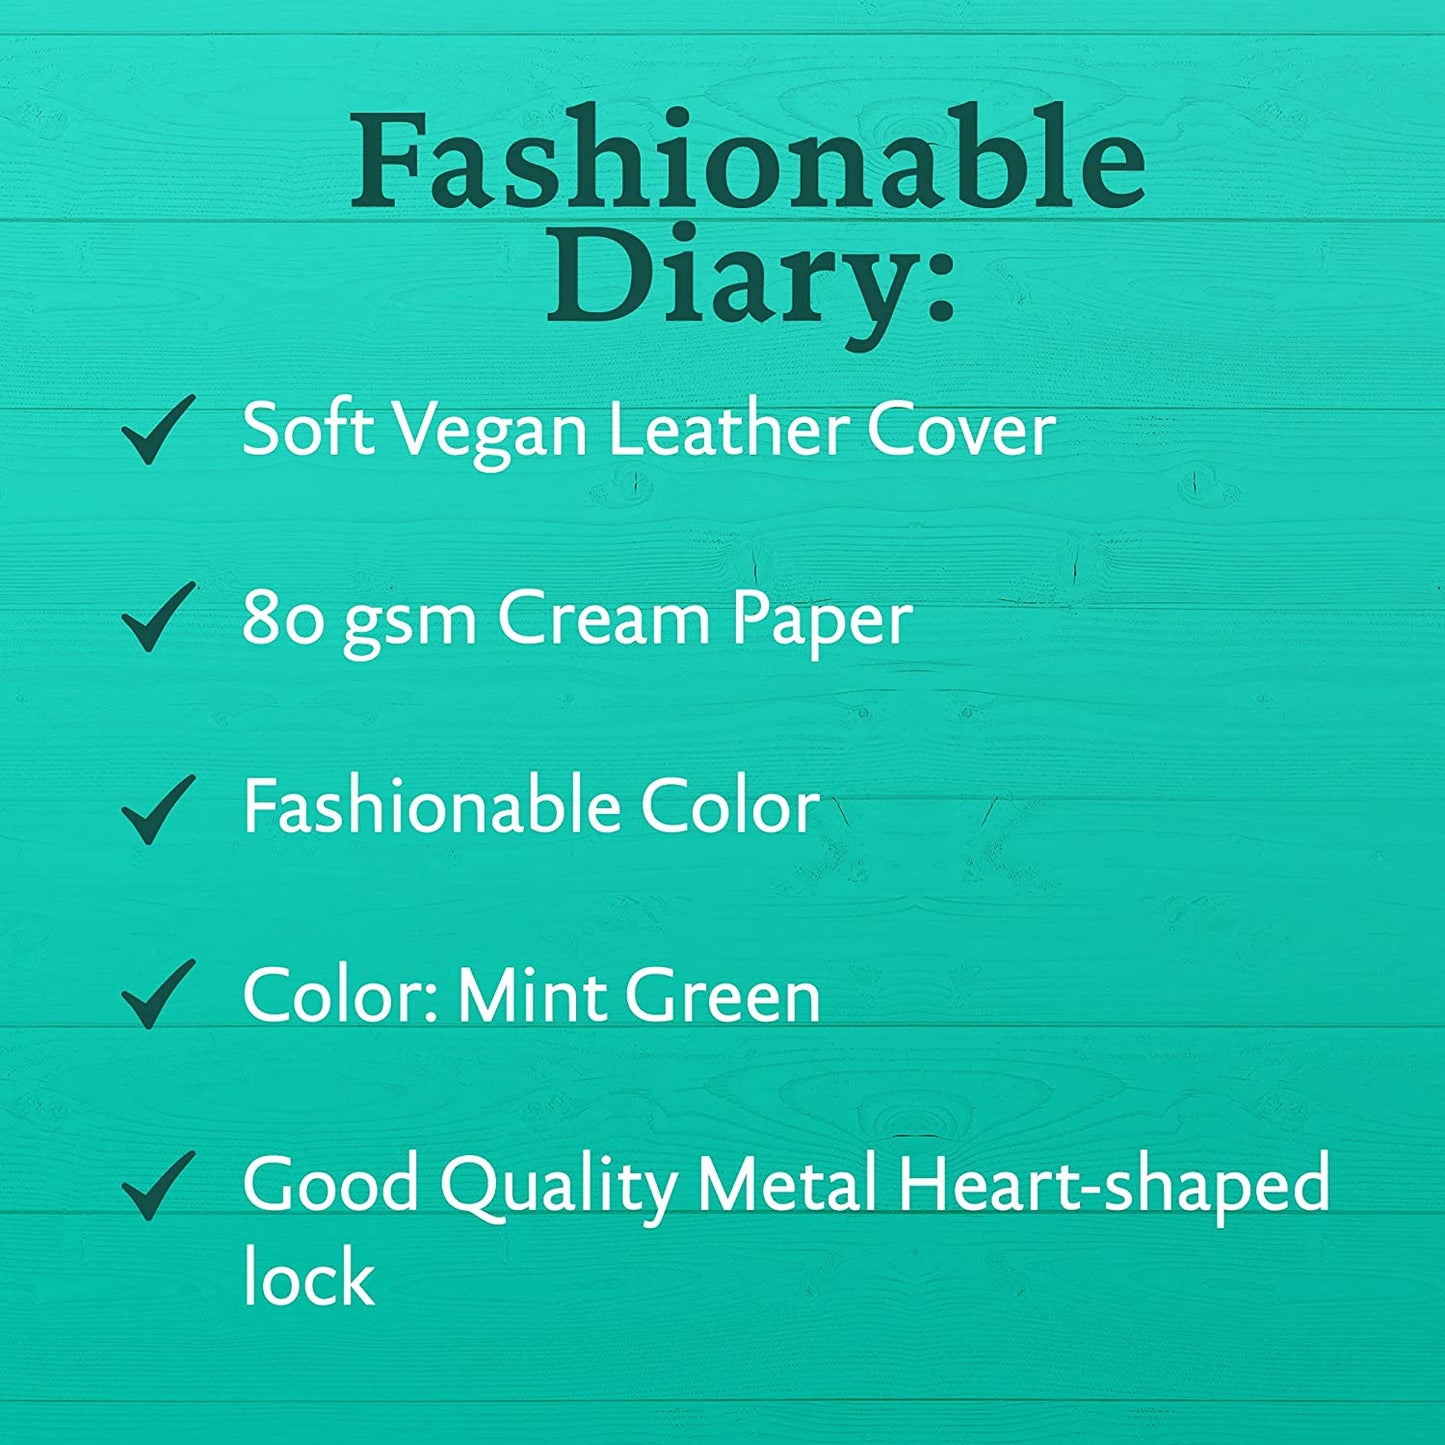 Heart Shaped Lock Journal, Lock Diary for Girls with Key, Vegan Leather Cover, Cute Locking Secret Notebook for Teens, 5.3x7.3",320p Victoria's Journals Secret Diary, College-ruled (Mint Green)